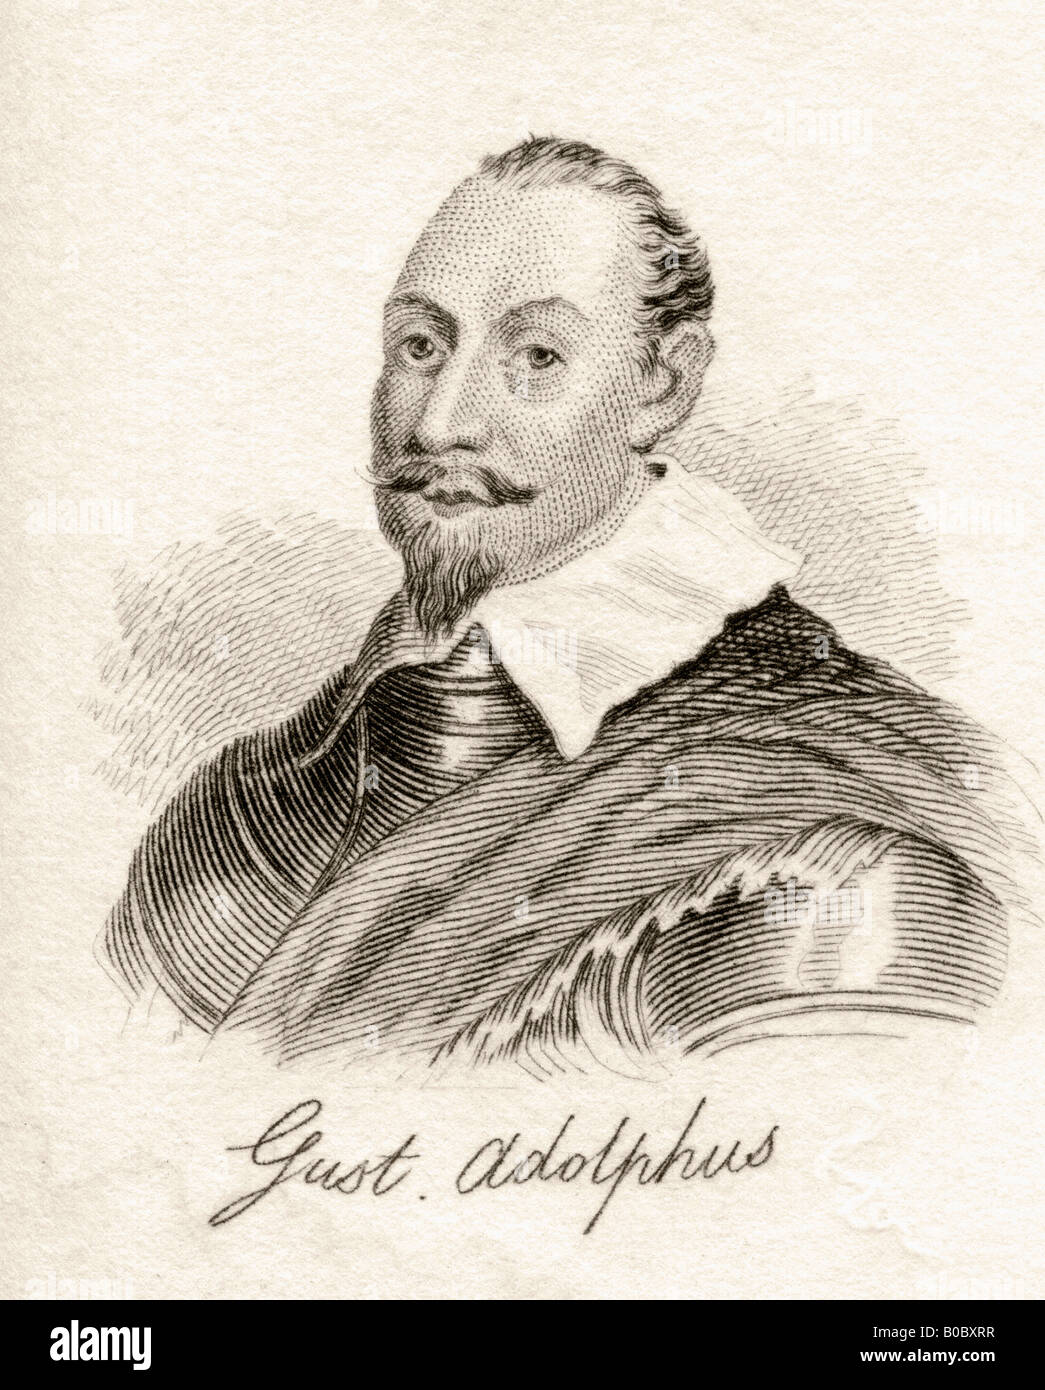 Gustavus Adolphus II, 1594 - 1632. King of Sweden. From the book Crabbs Historical Dictionary, published 1825. Stock Photo